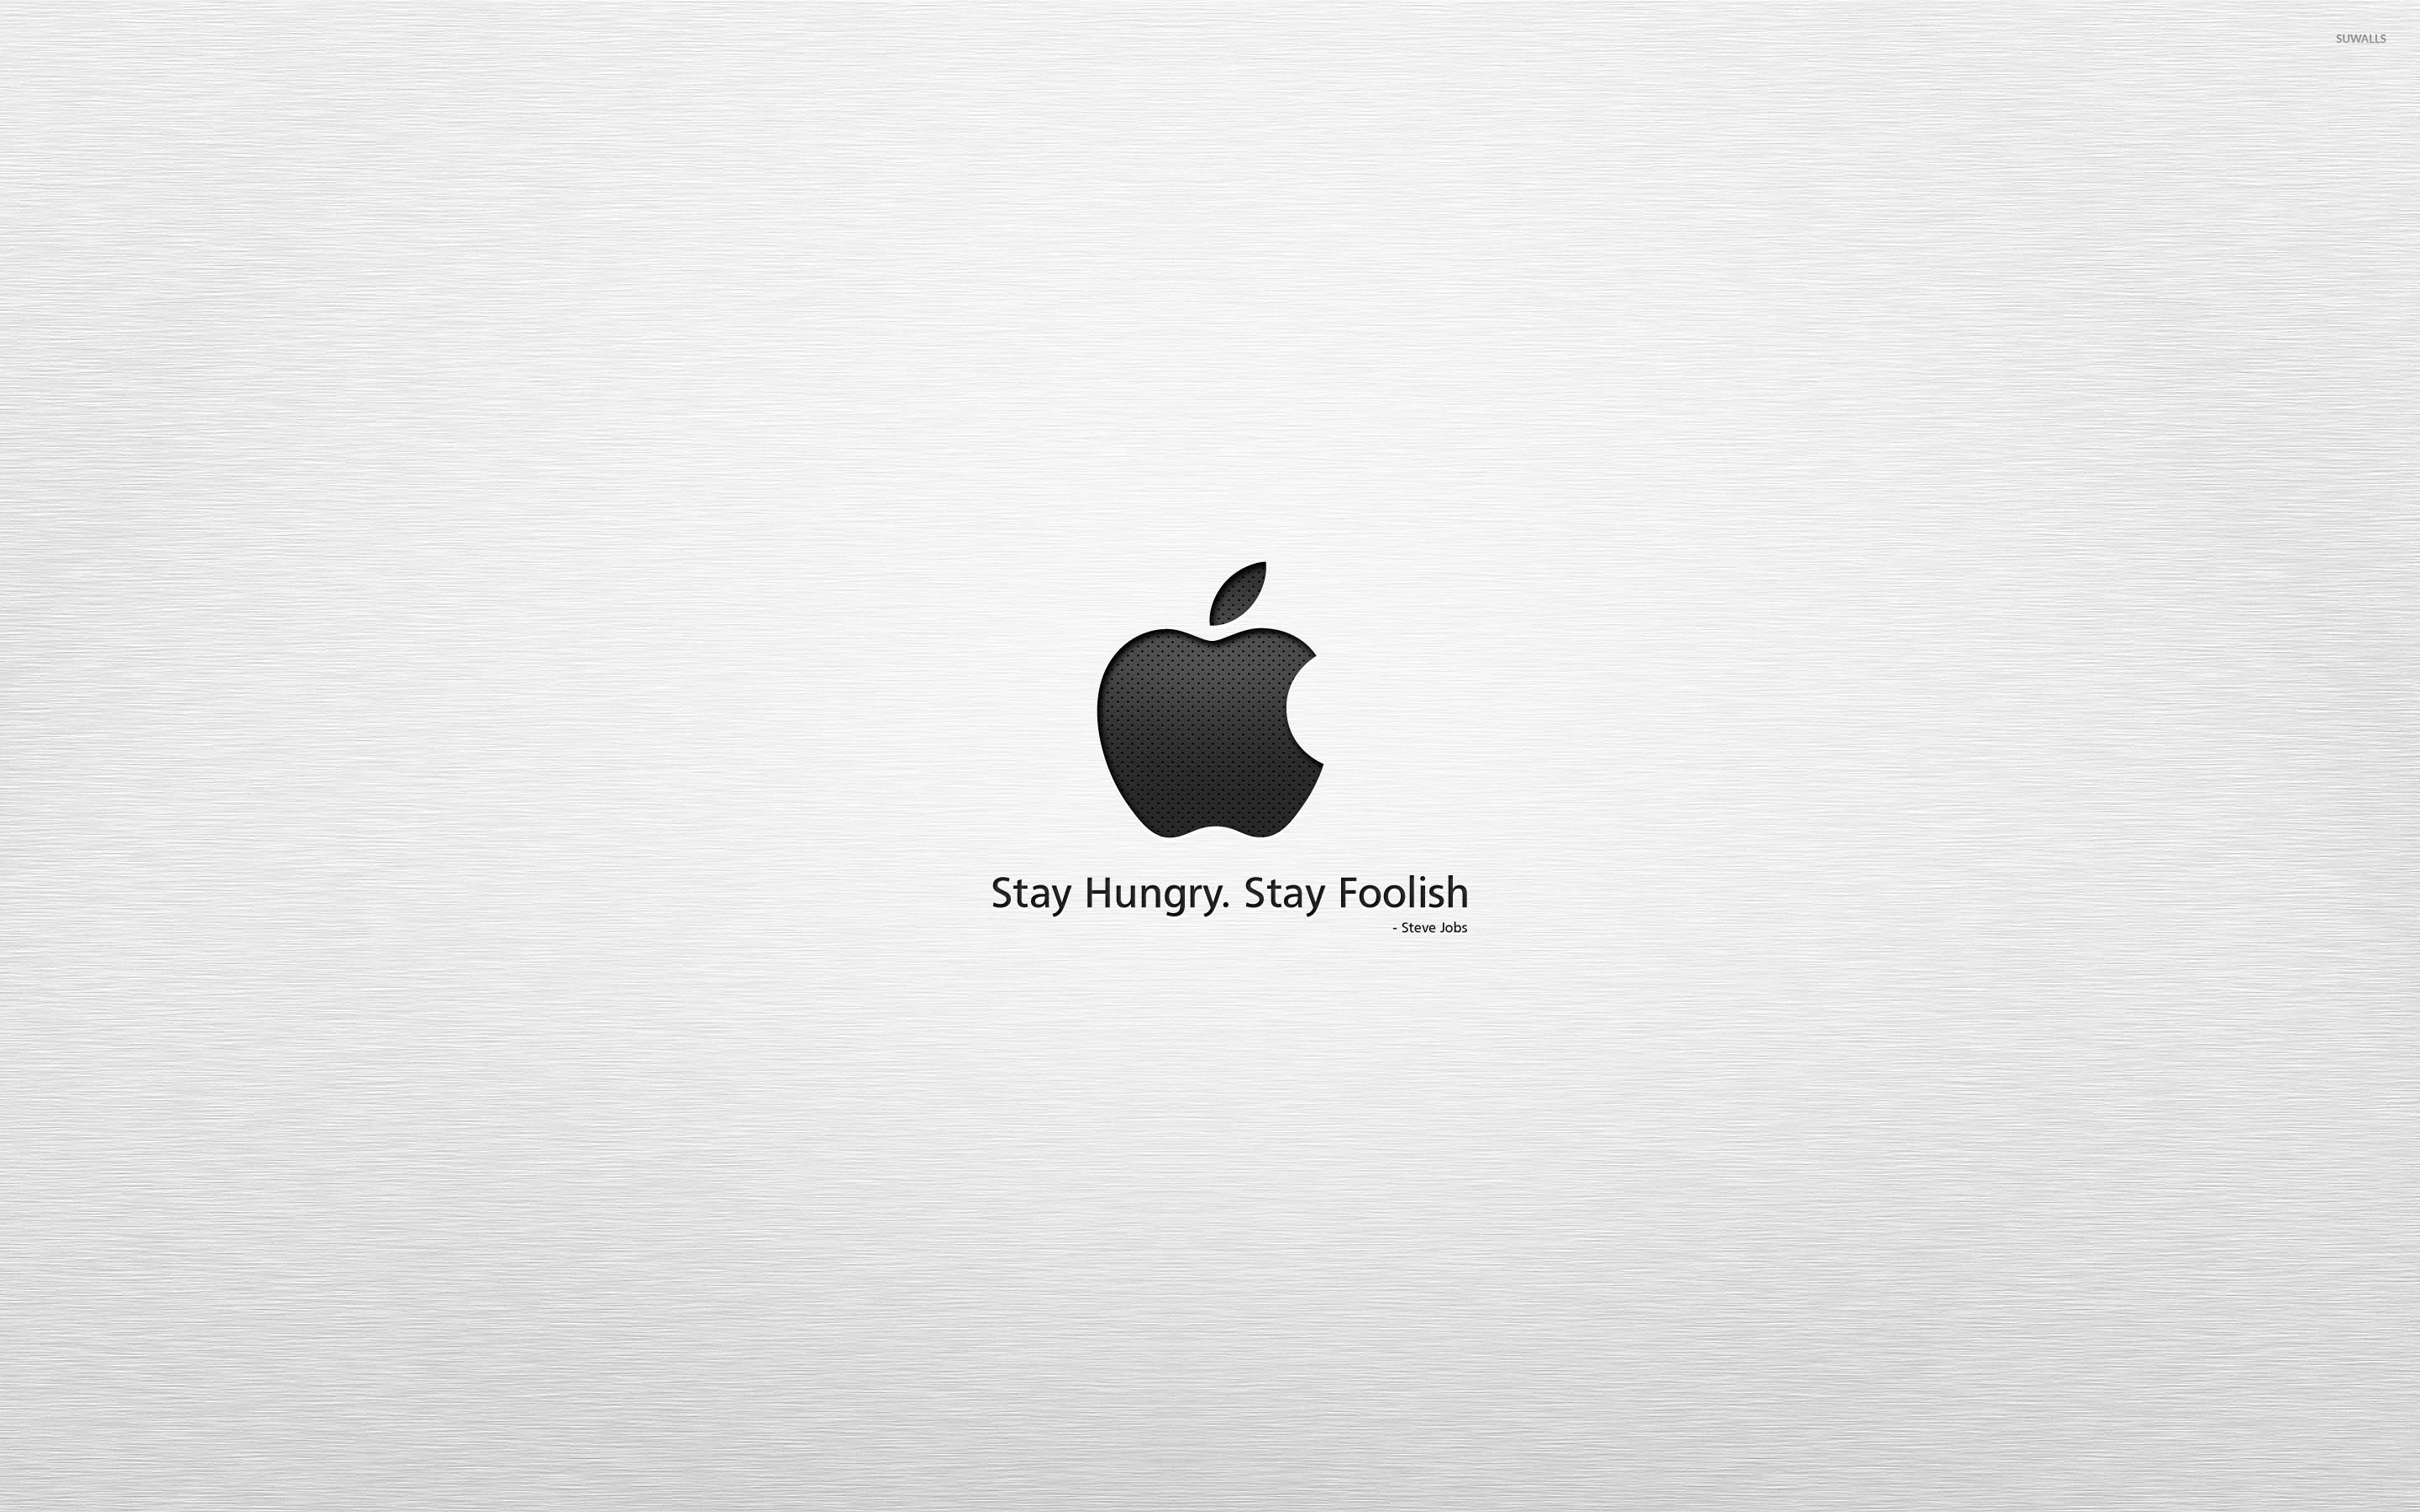 Stay hungry, stay foolish wallpaper wallpaper